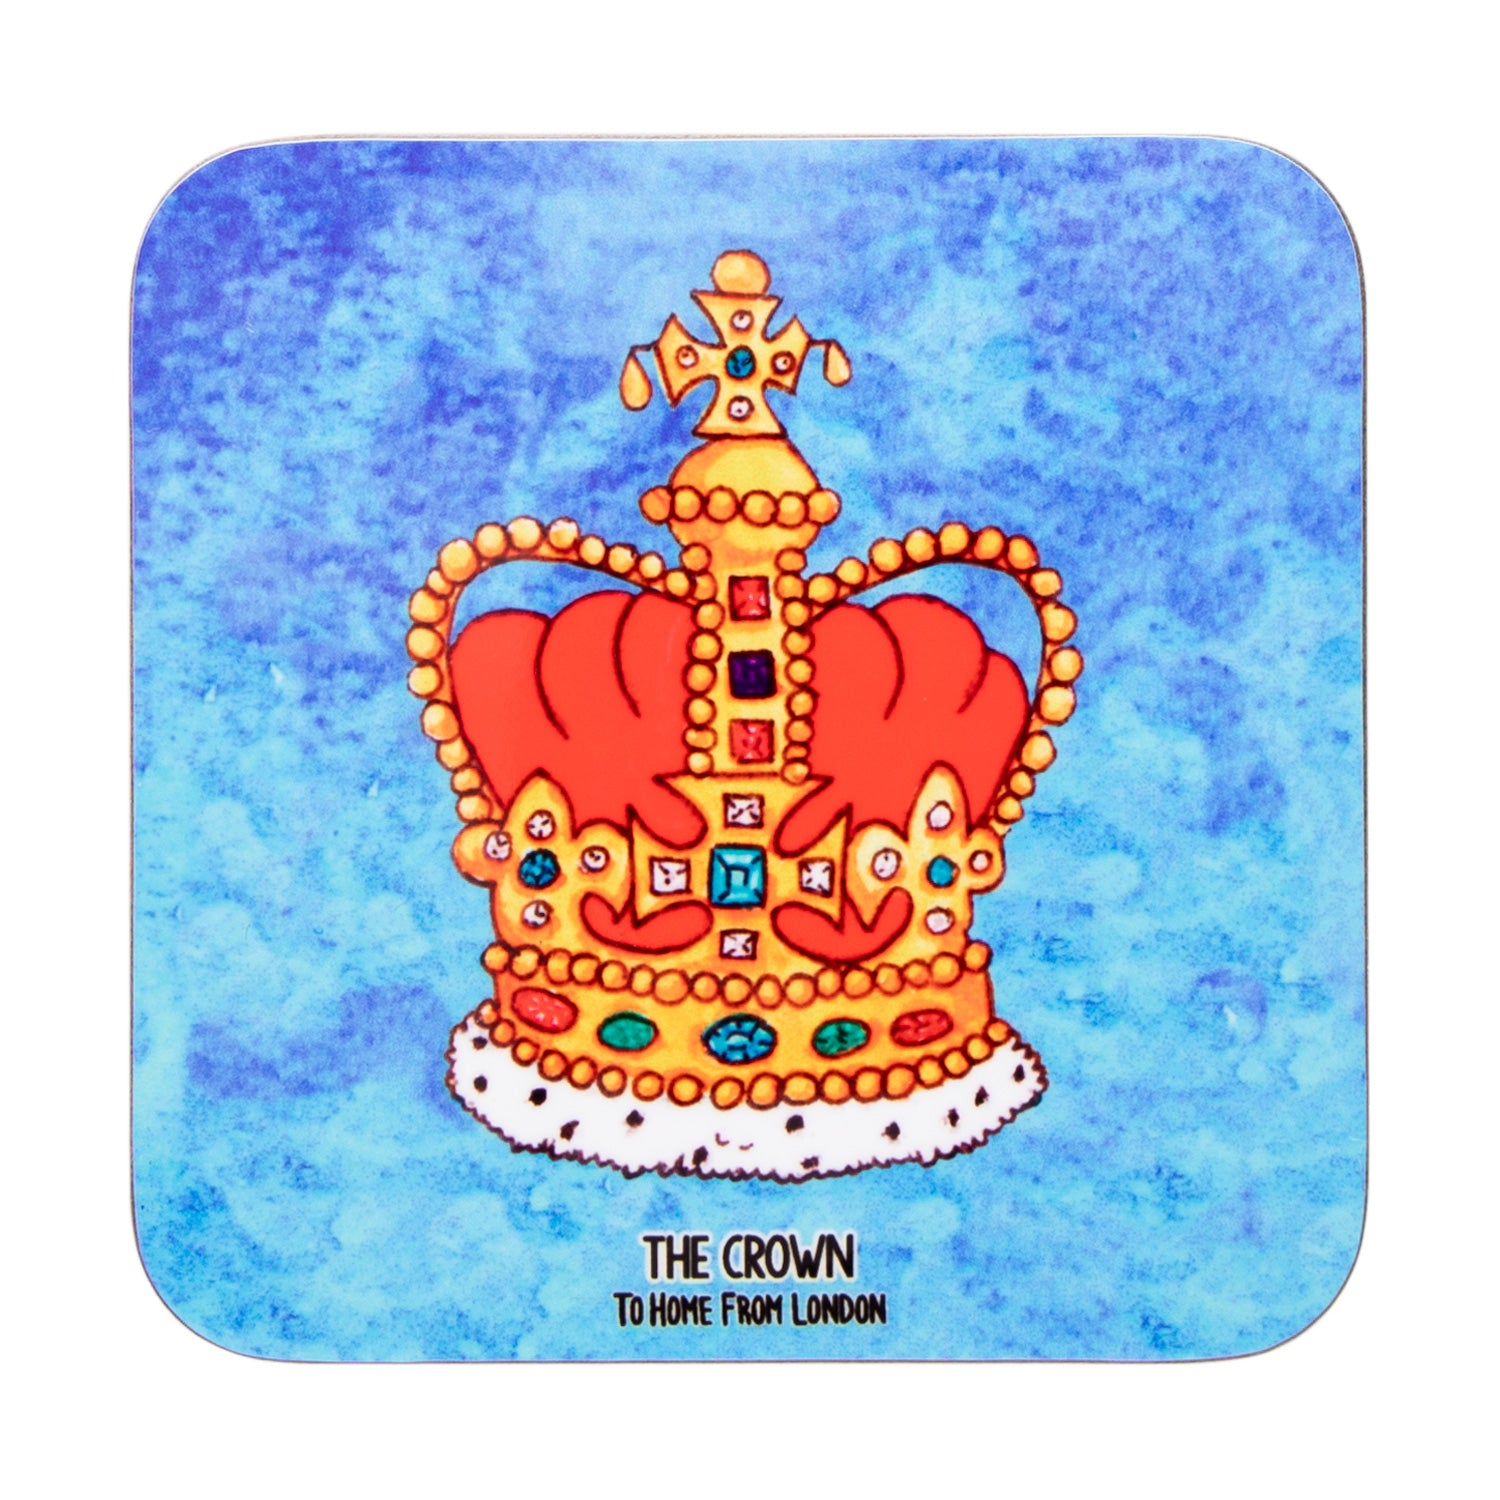 To Home From London Magnetic Coaster - The Crown